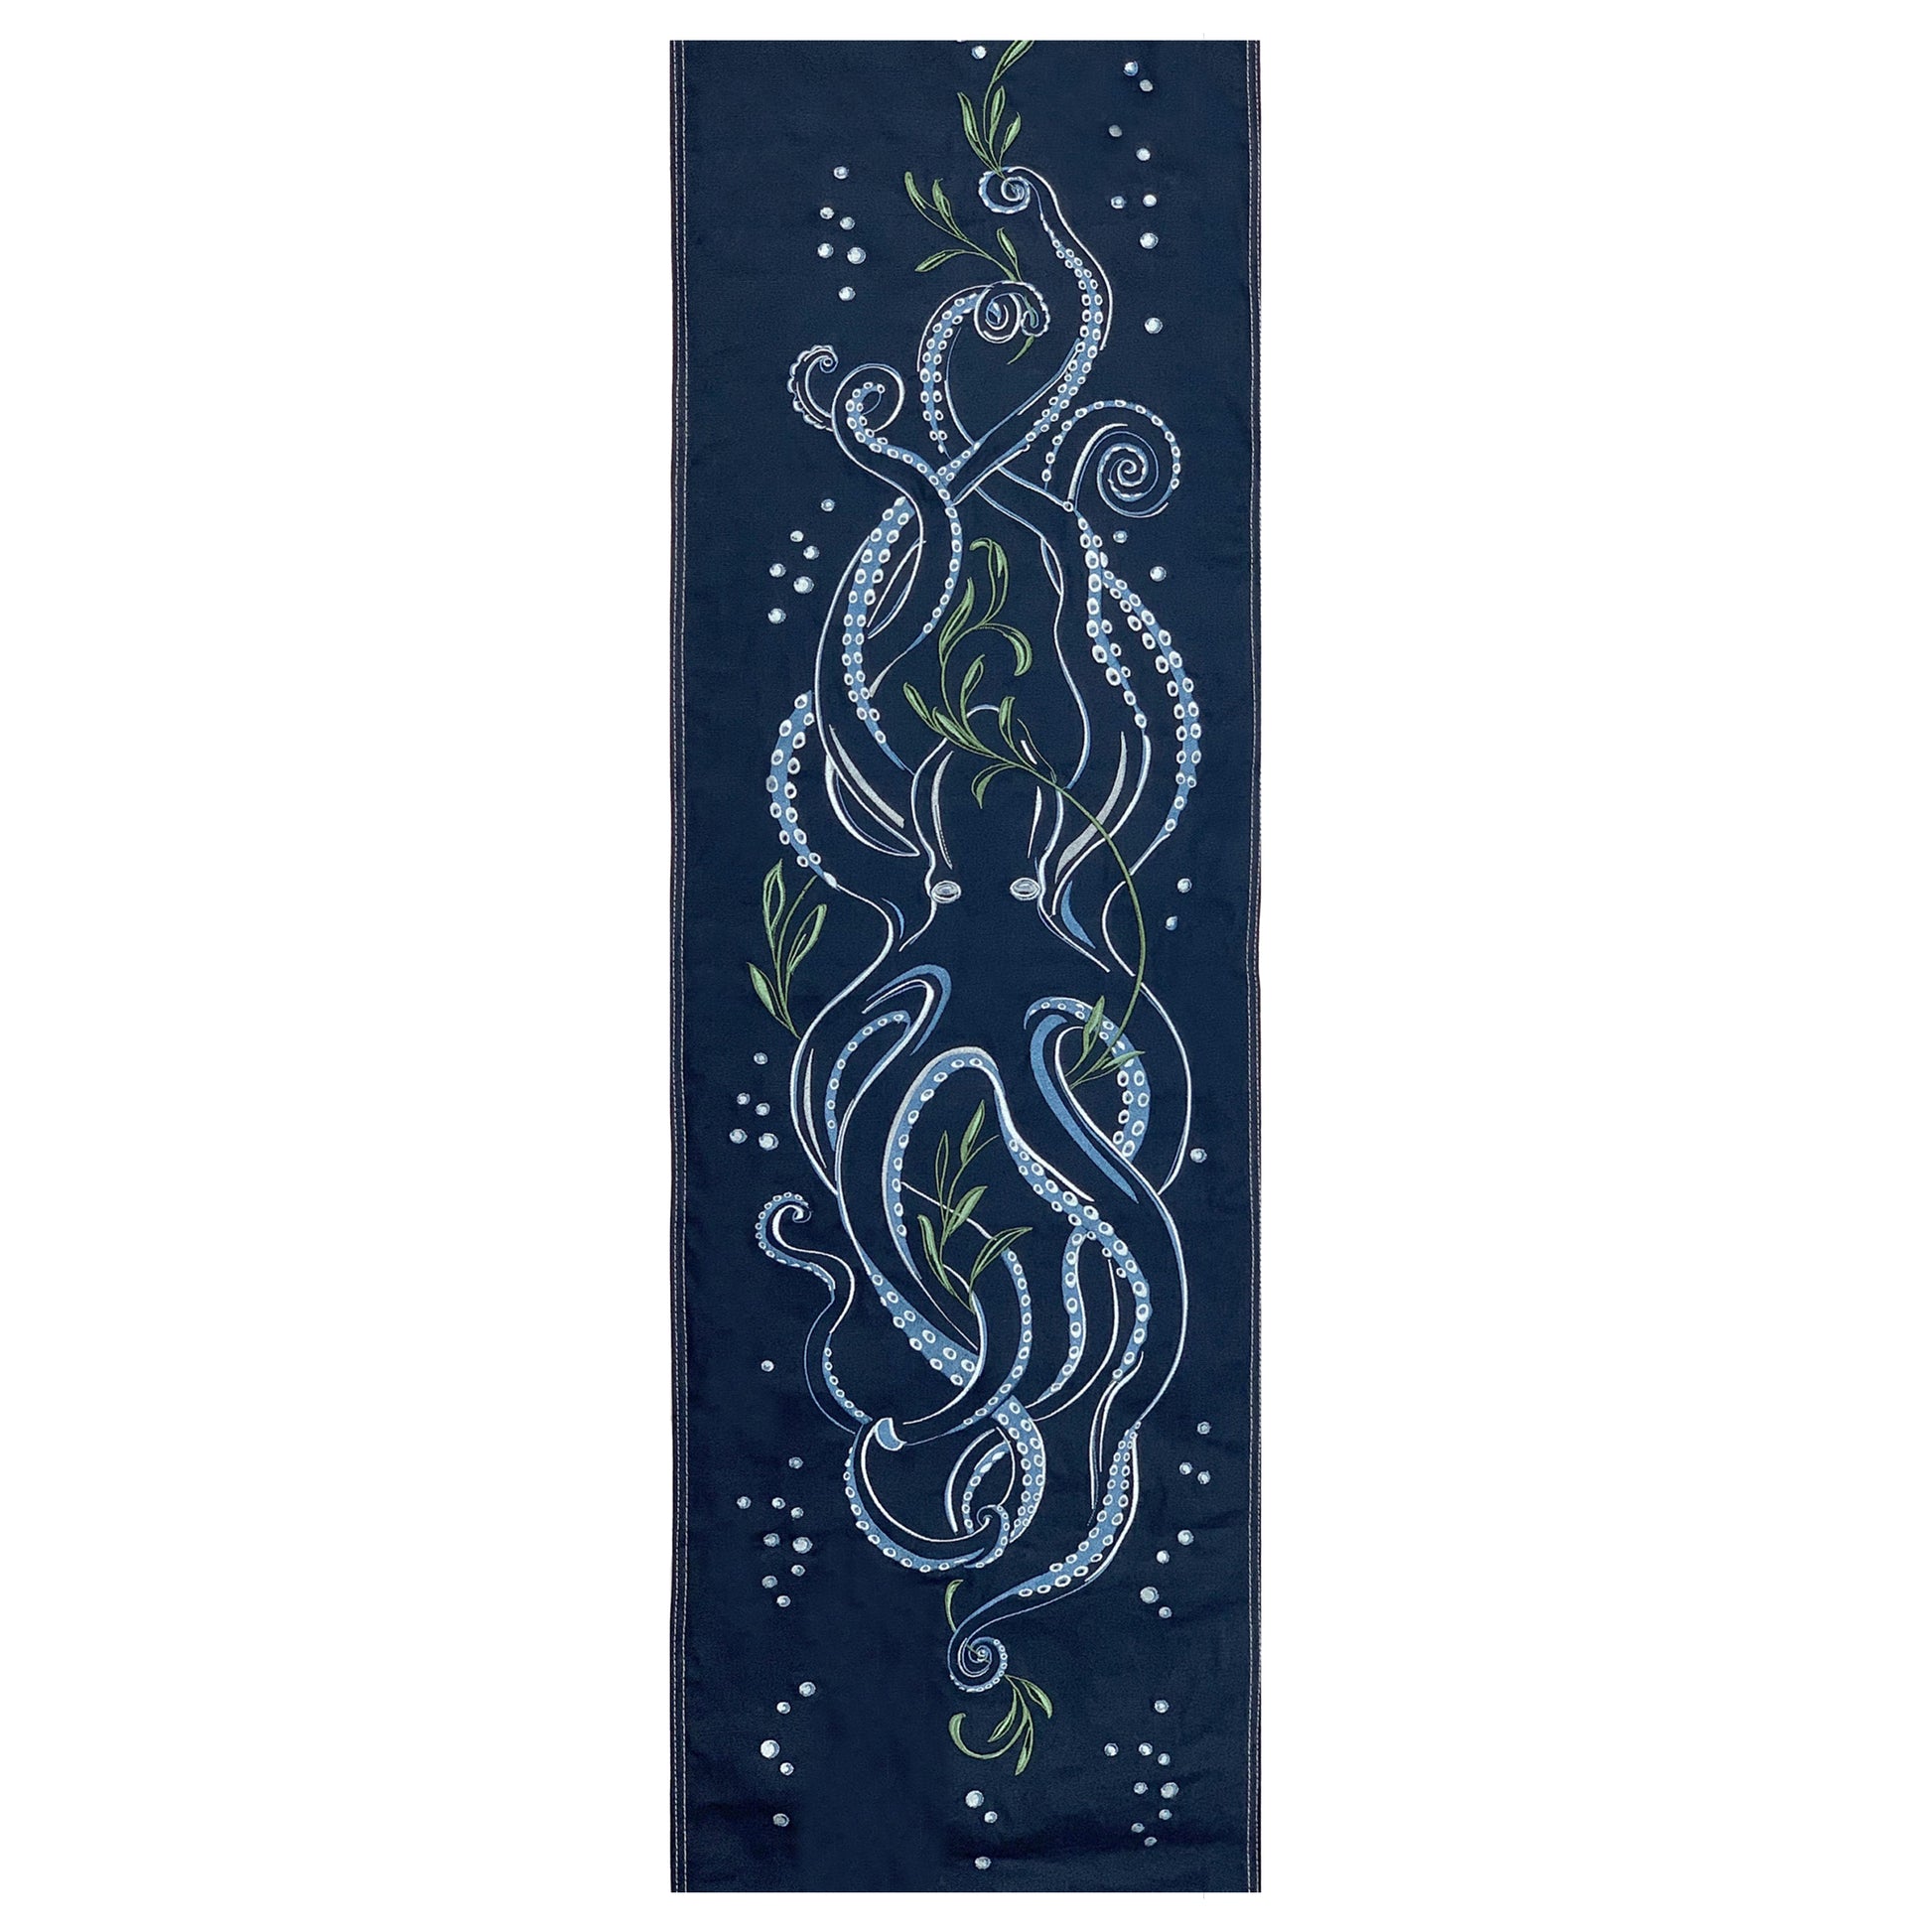 Octopus and seaweed embroidered on a deep ocean blue cotton panel.